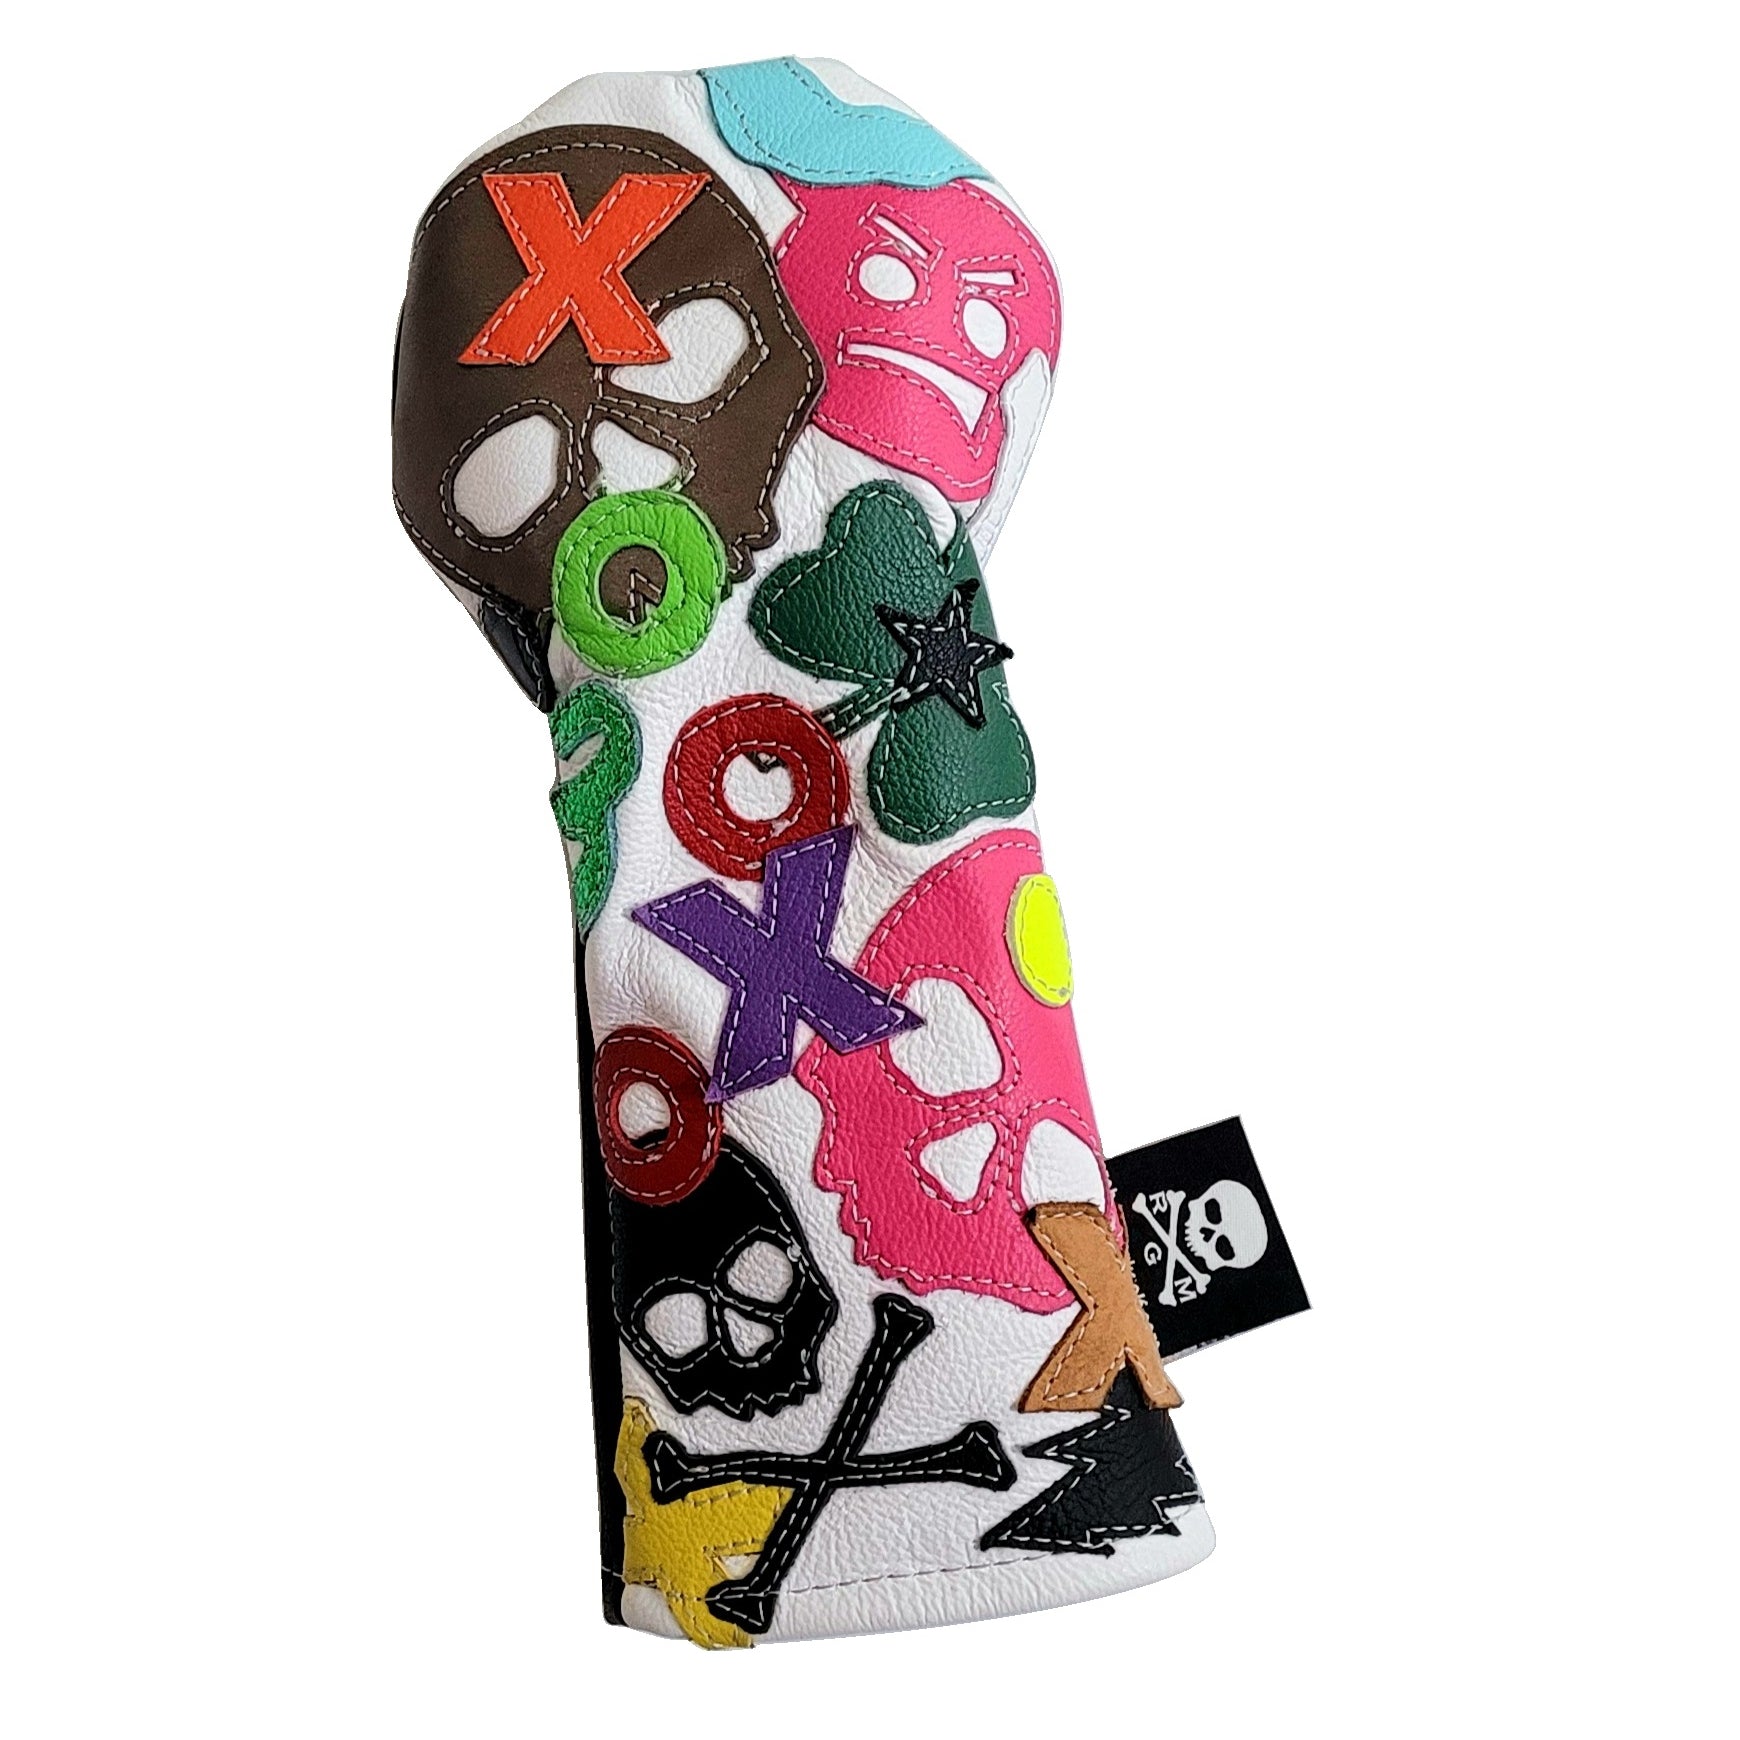 New! One-Of-A-Kind! The RMG Collage Fairway Wood Headcover - Robert Mark Golf